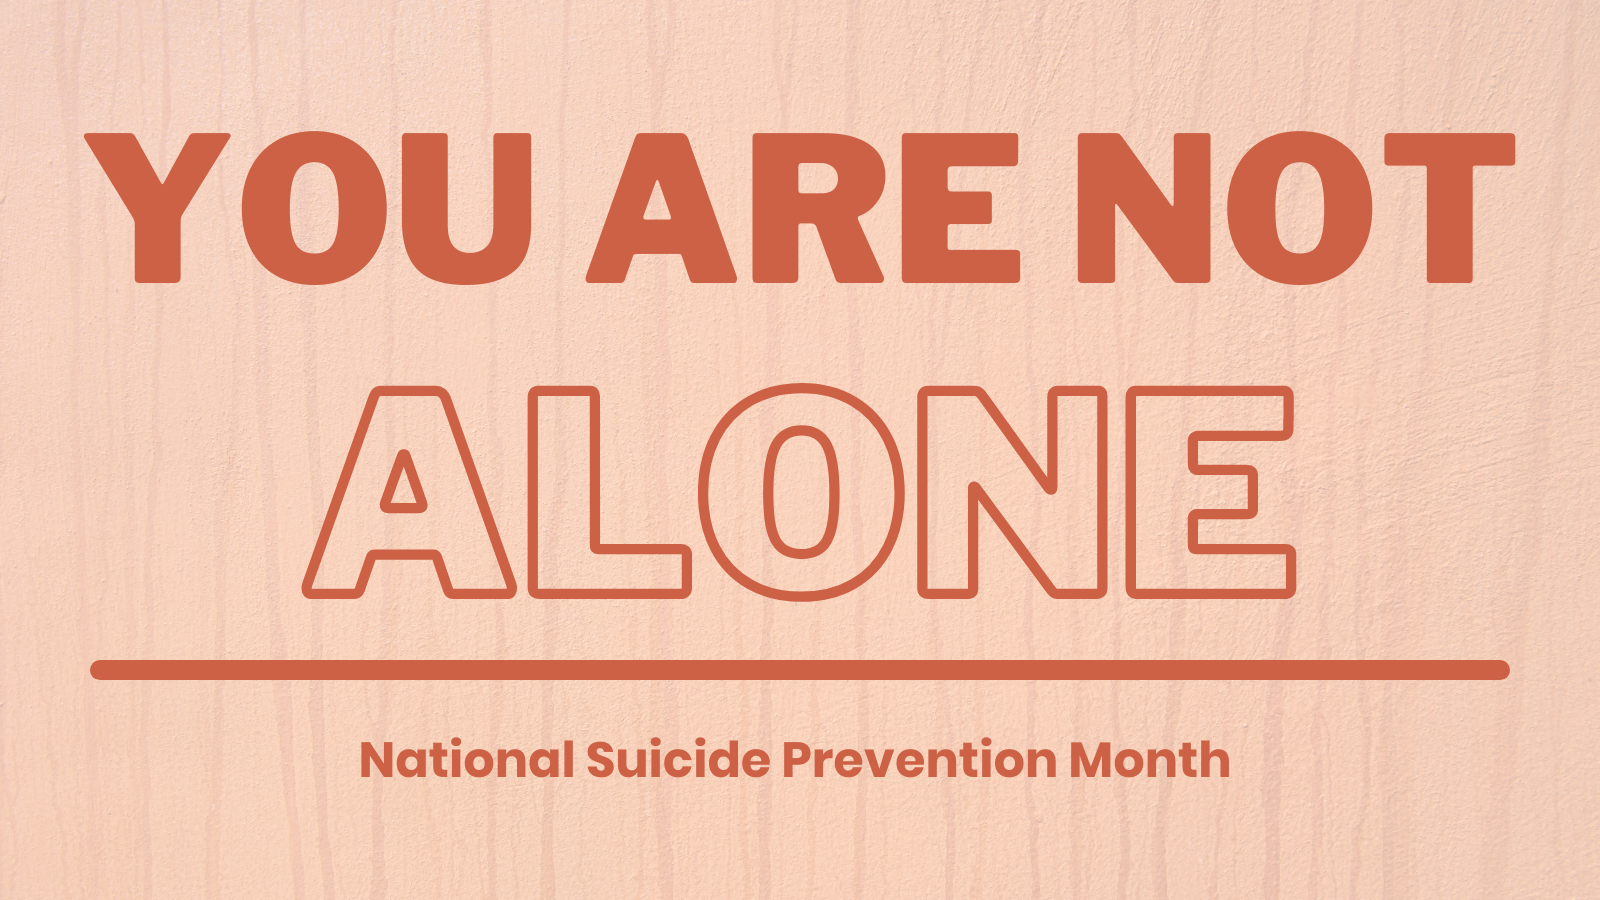 Text reading: You are not alone National Suicide Prevention Month